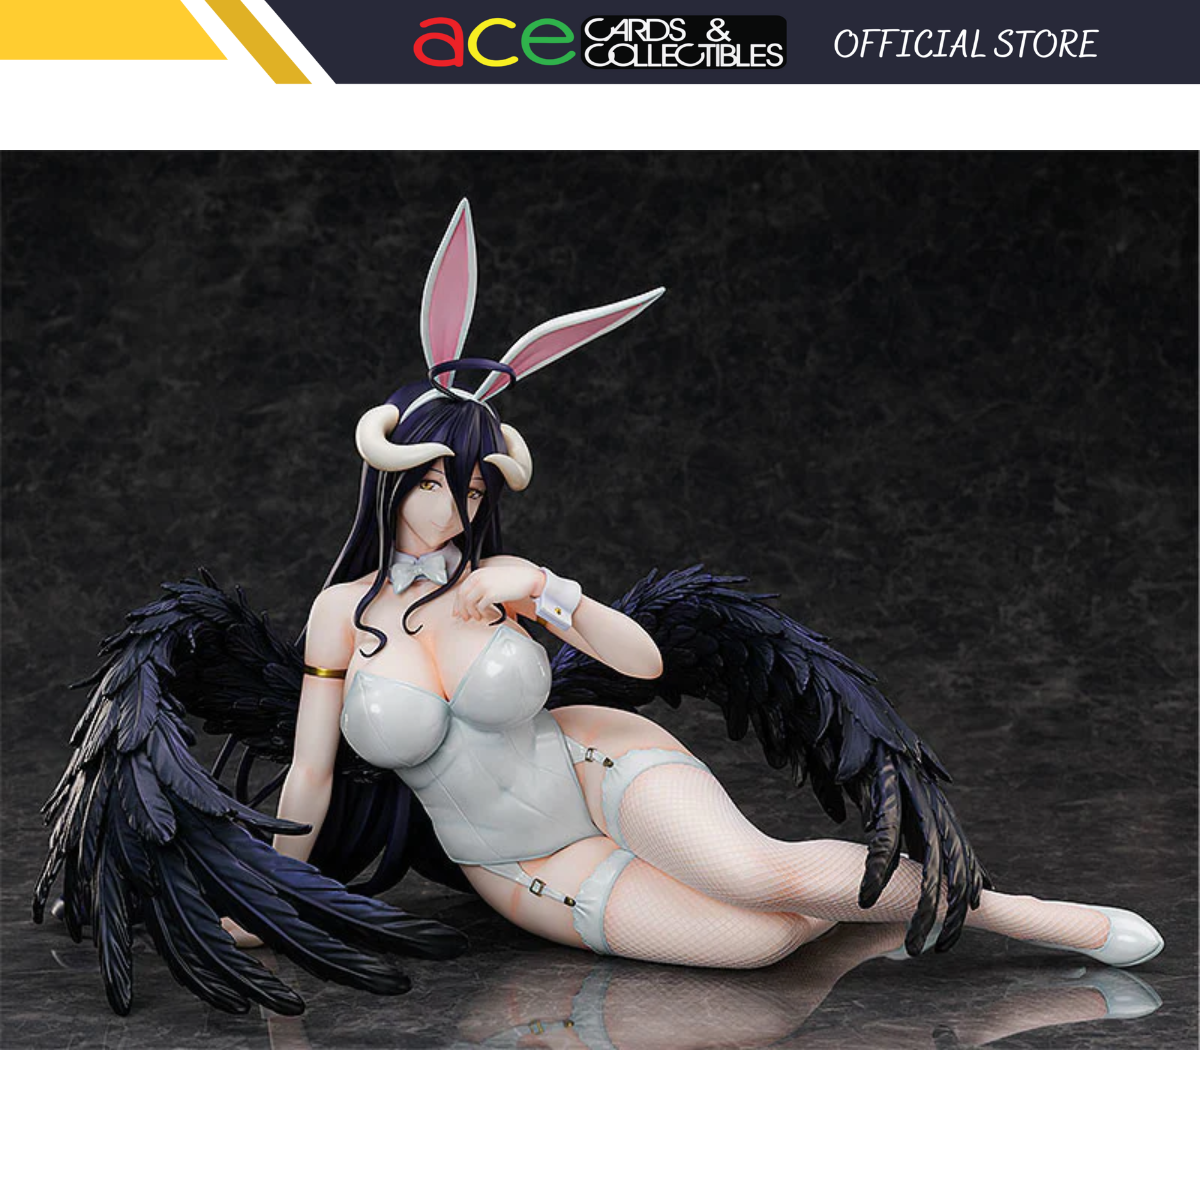 Overlord IV FREEing Bunny Ver. Figurine "Albedo"-FREEing-Ace Cards & Collectibles